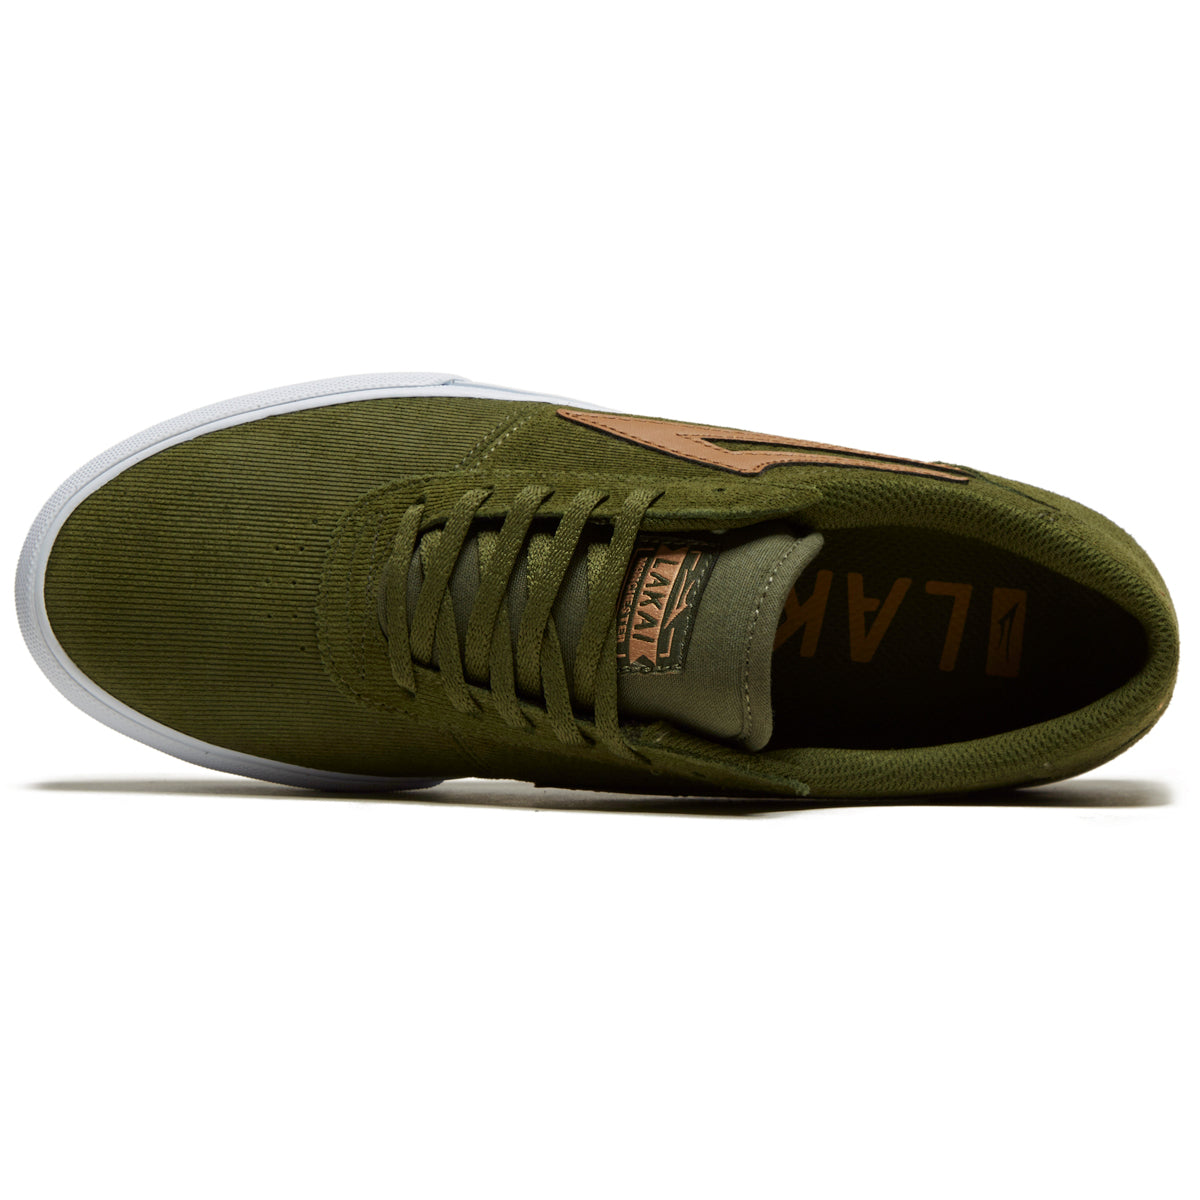 Lakai Manchester Shoes - Olive Cord Suede image 3